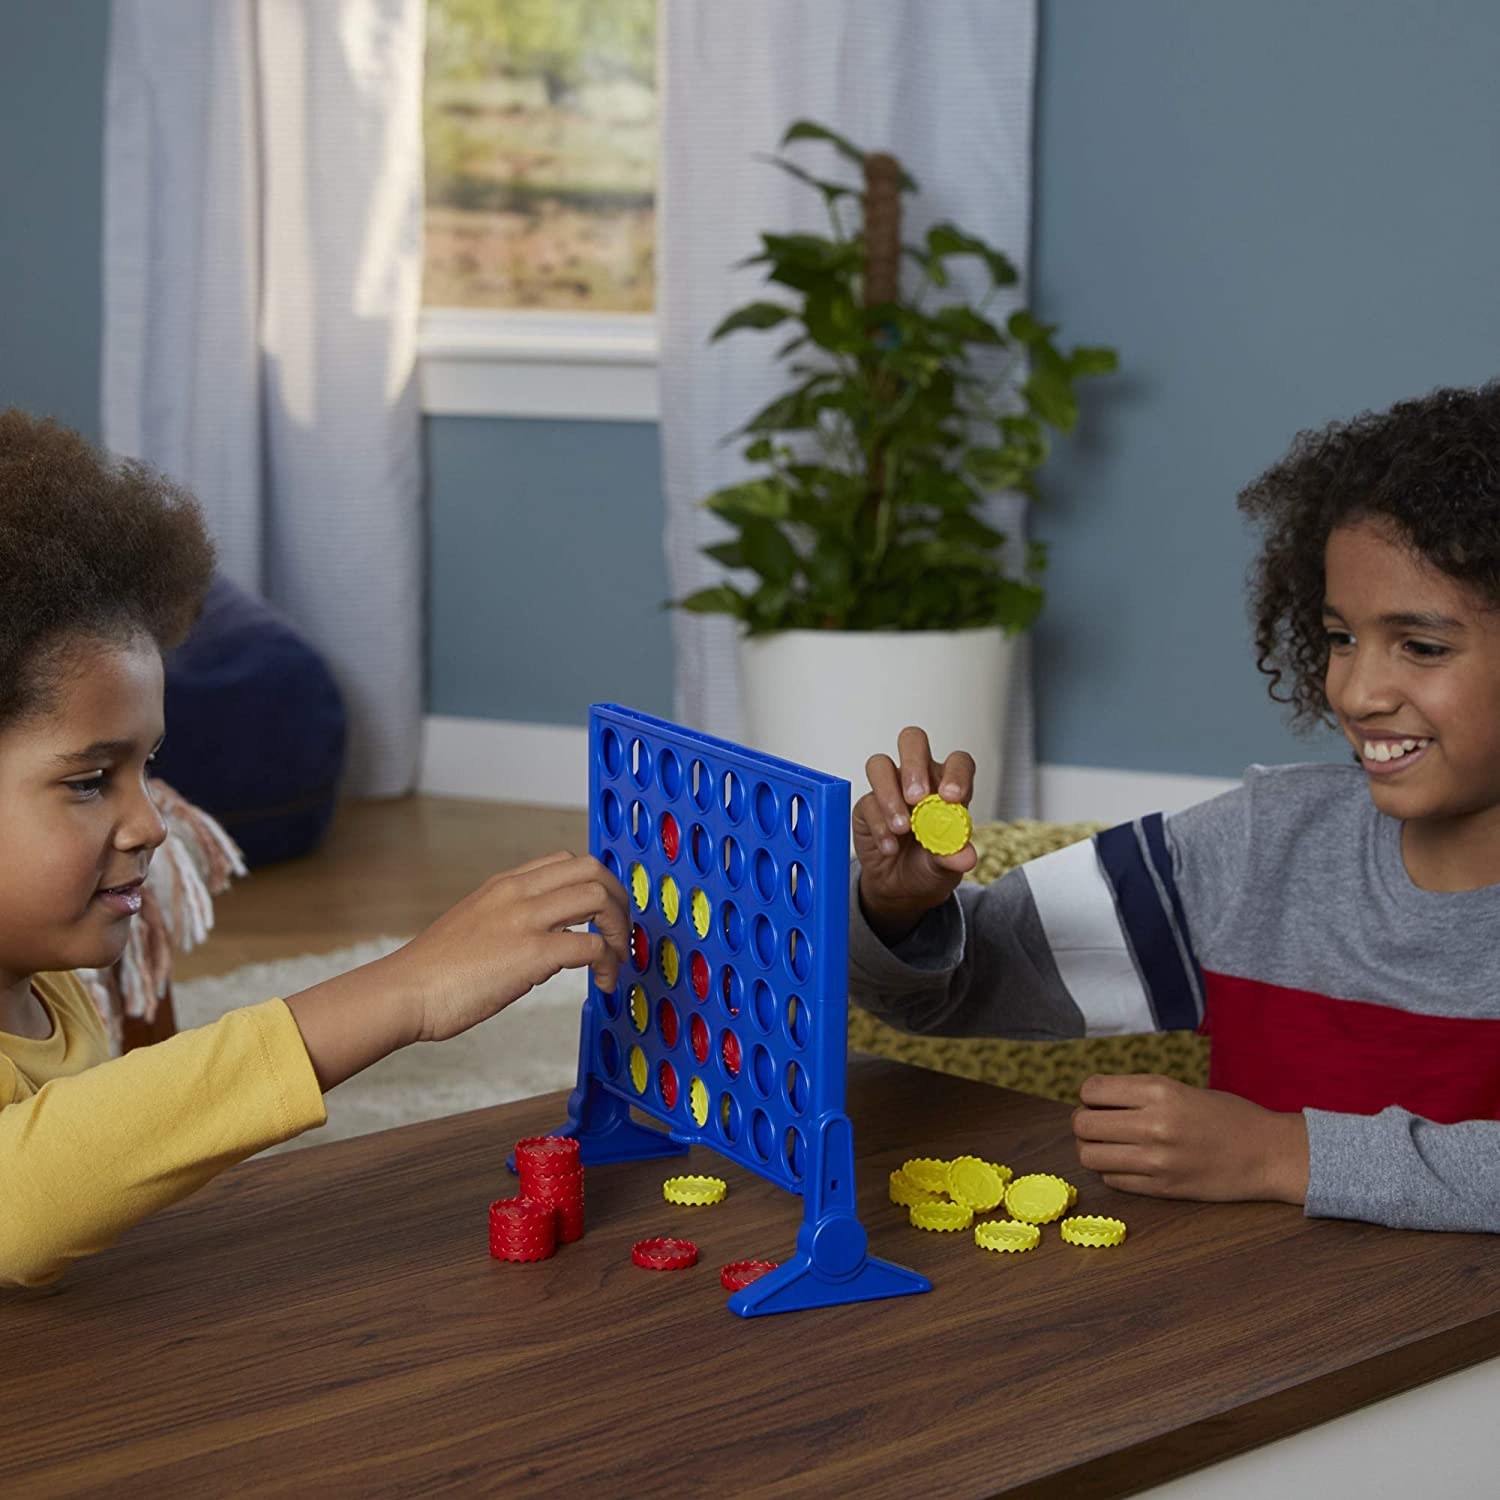 kids playing connect four